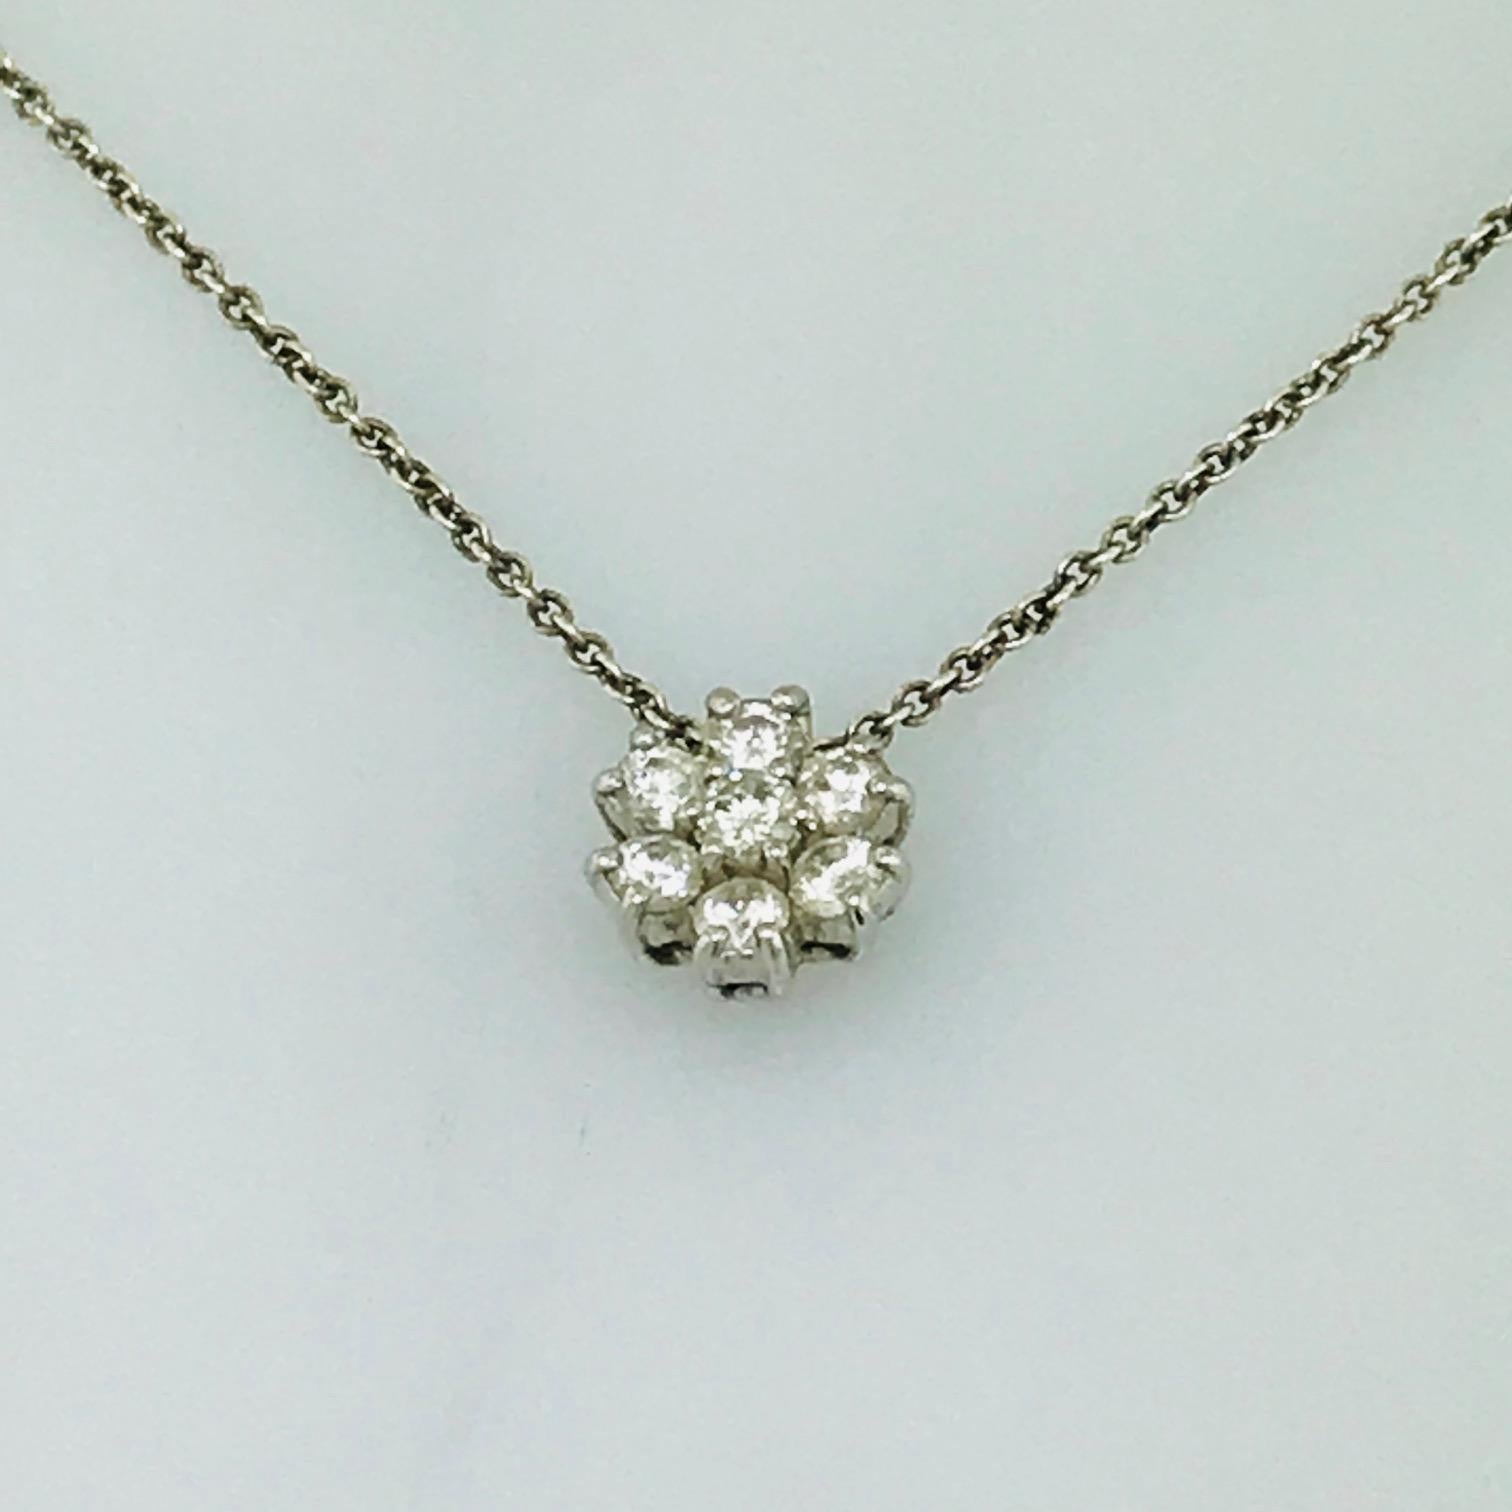 This Tiffany & Co. Diamond Necklace is an original Tiffany & Co. piece with the original Tiffany & Co. box. This sterling silver diamond cluster necklace has .30 carats total diamond weight with the round brilliant diamonds set in a flower-like